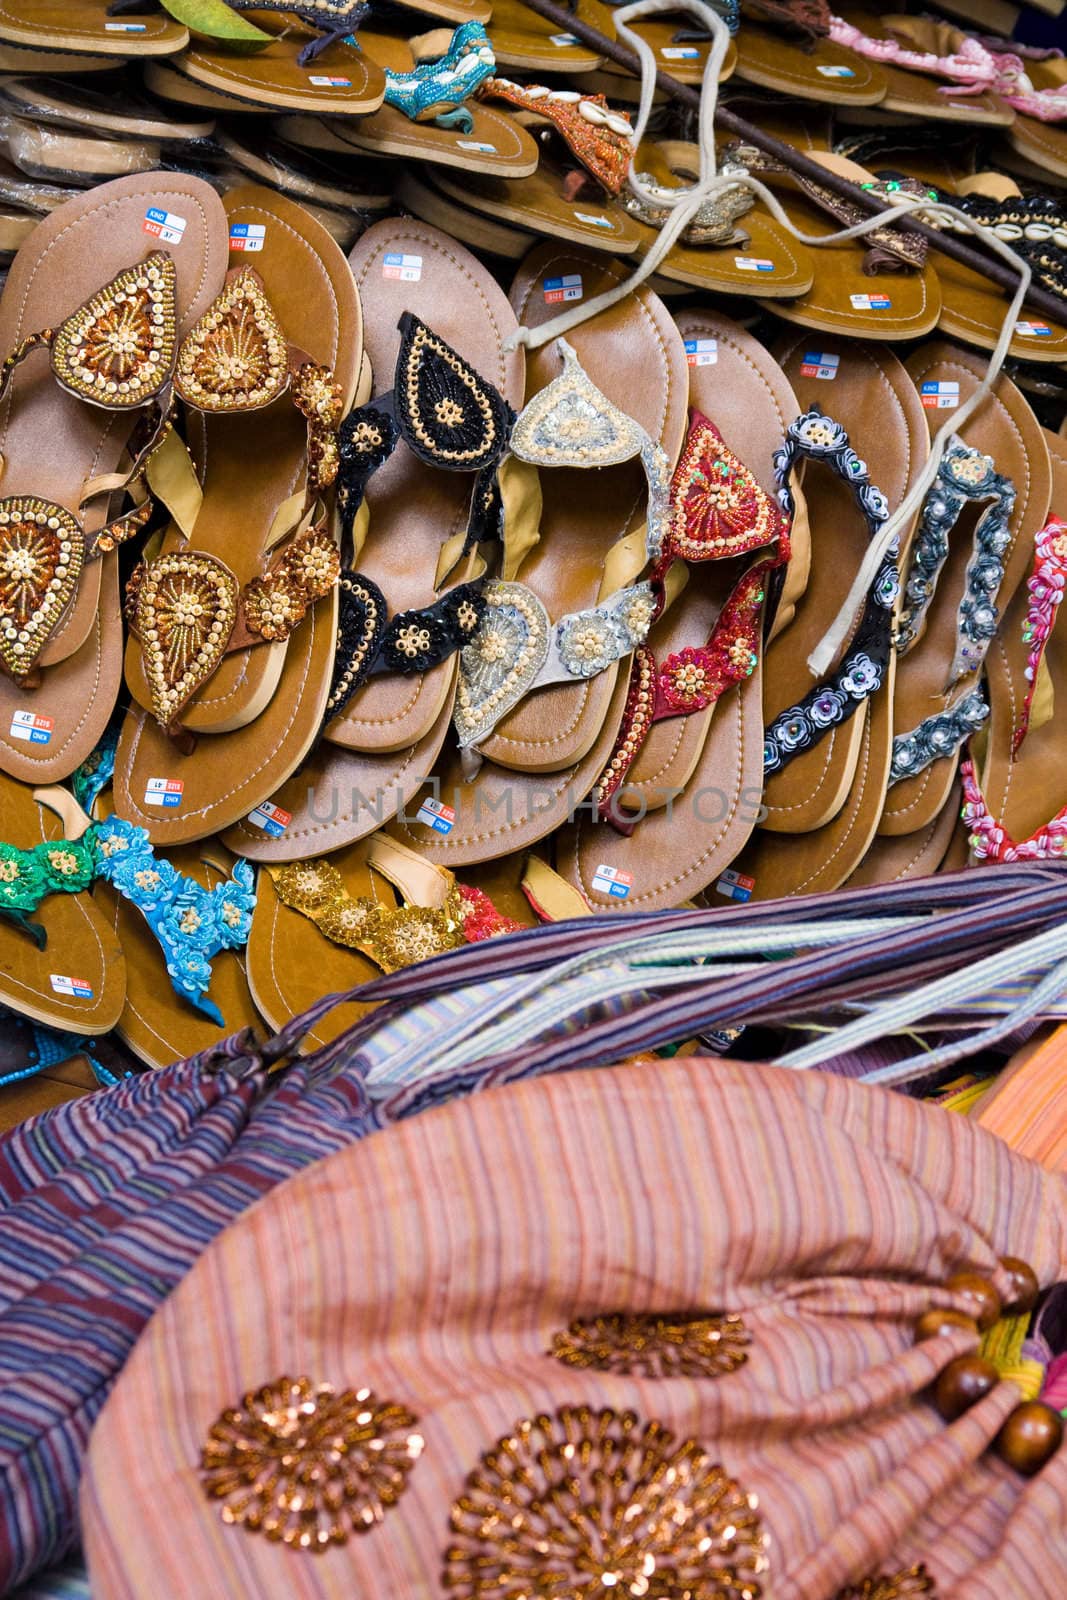 Detail of market stand with handmade sandals and purses, Bali, Indonesia.